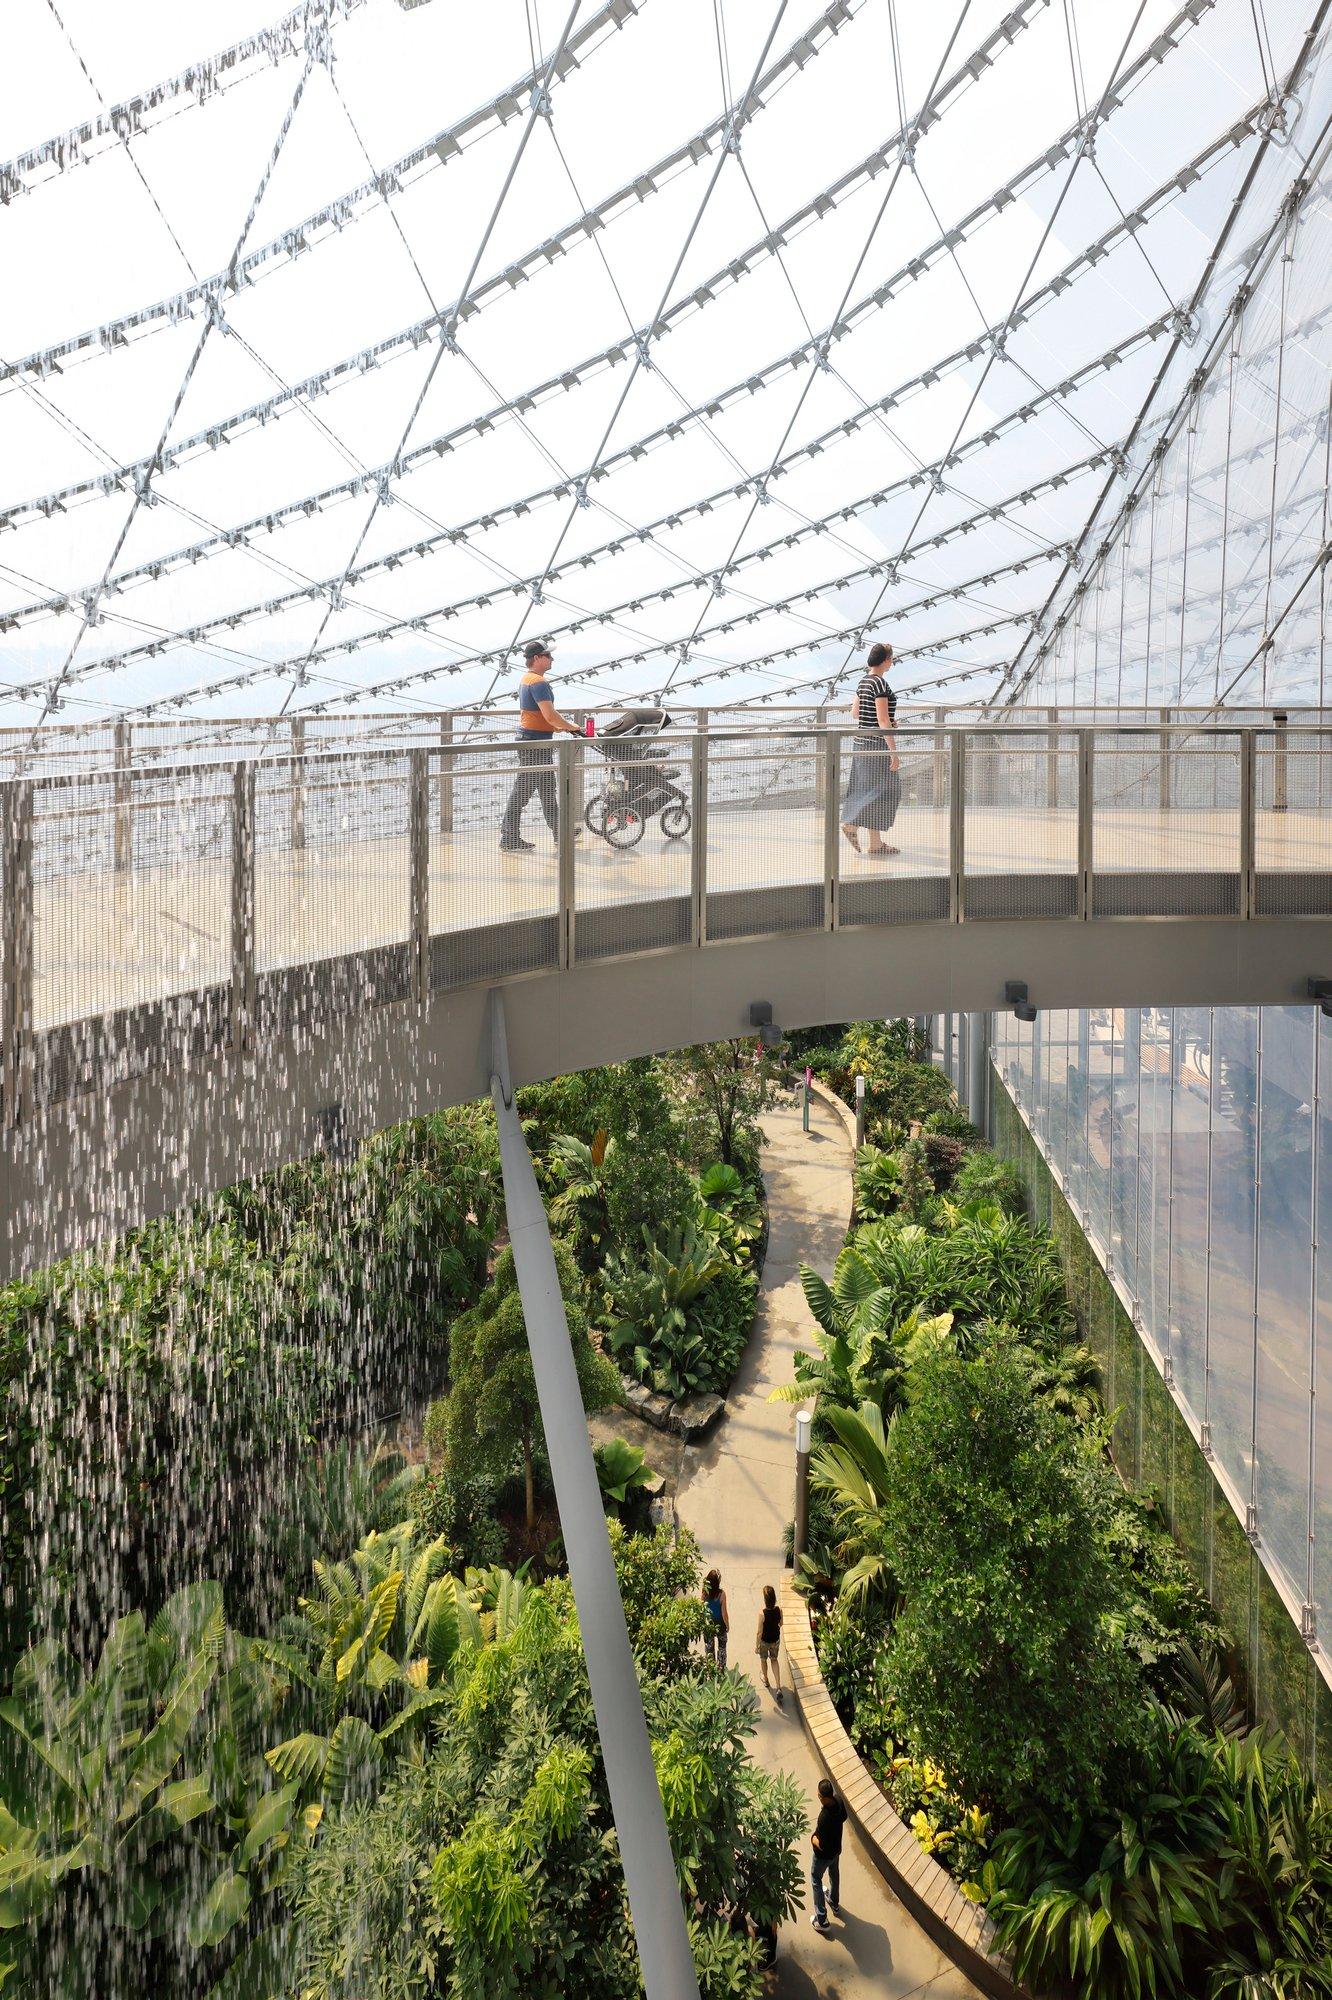 The Leaf relies on a geothermal heating system, which pulls in ground water, to regulate internal temps year-round. A 60-foot waterfall, visible from the raised walkway, tweaks the humidity levels.